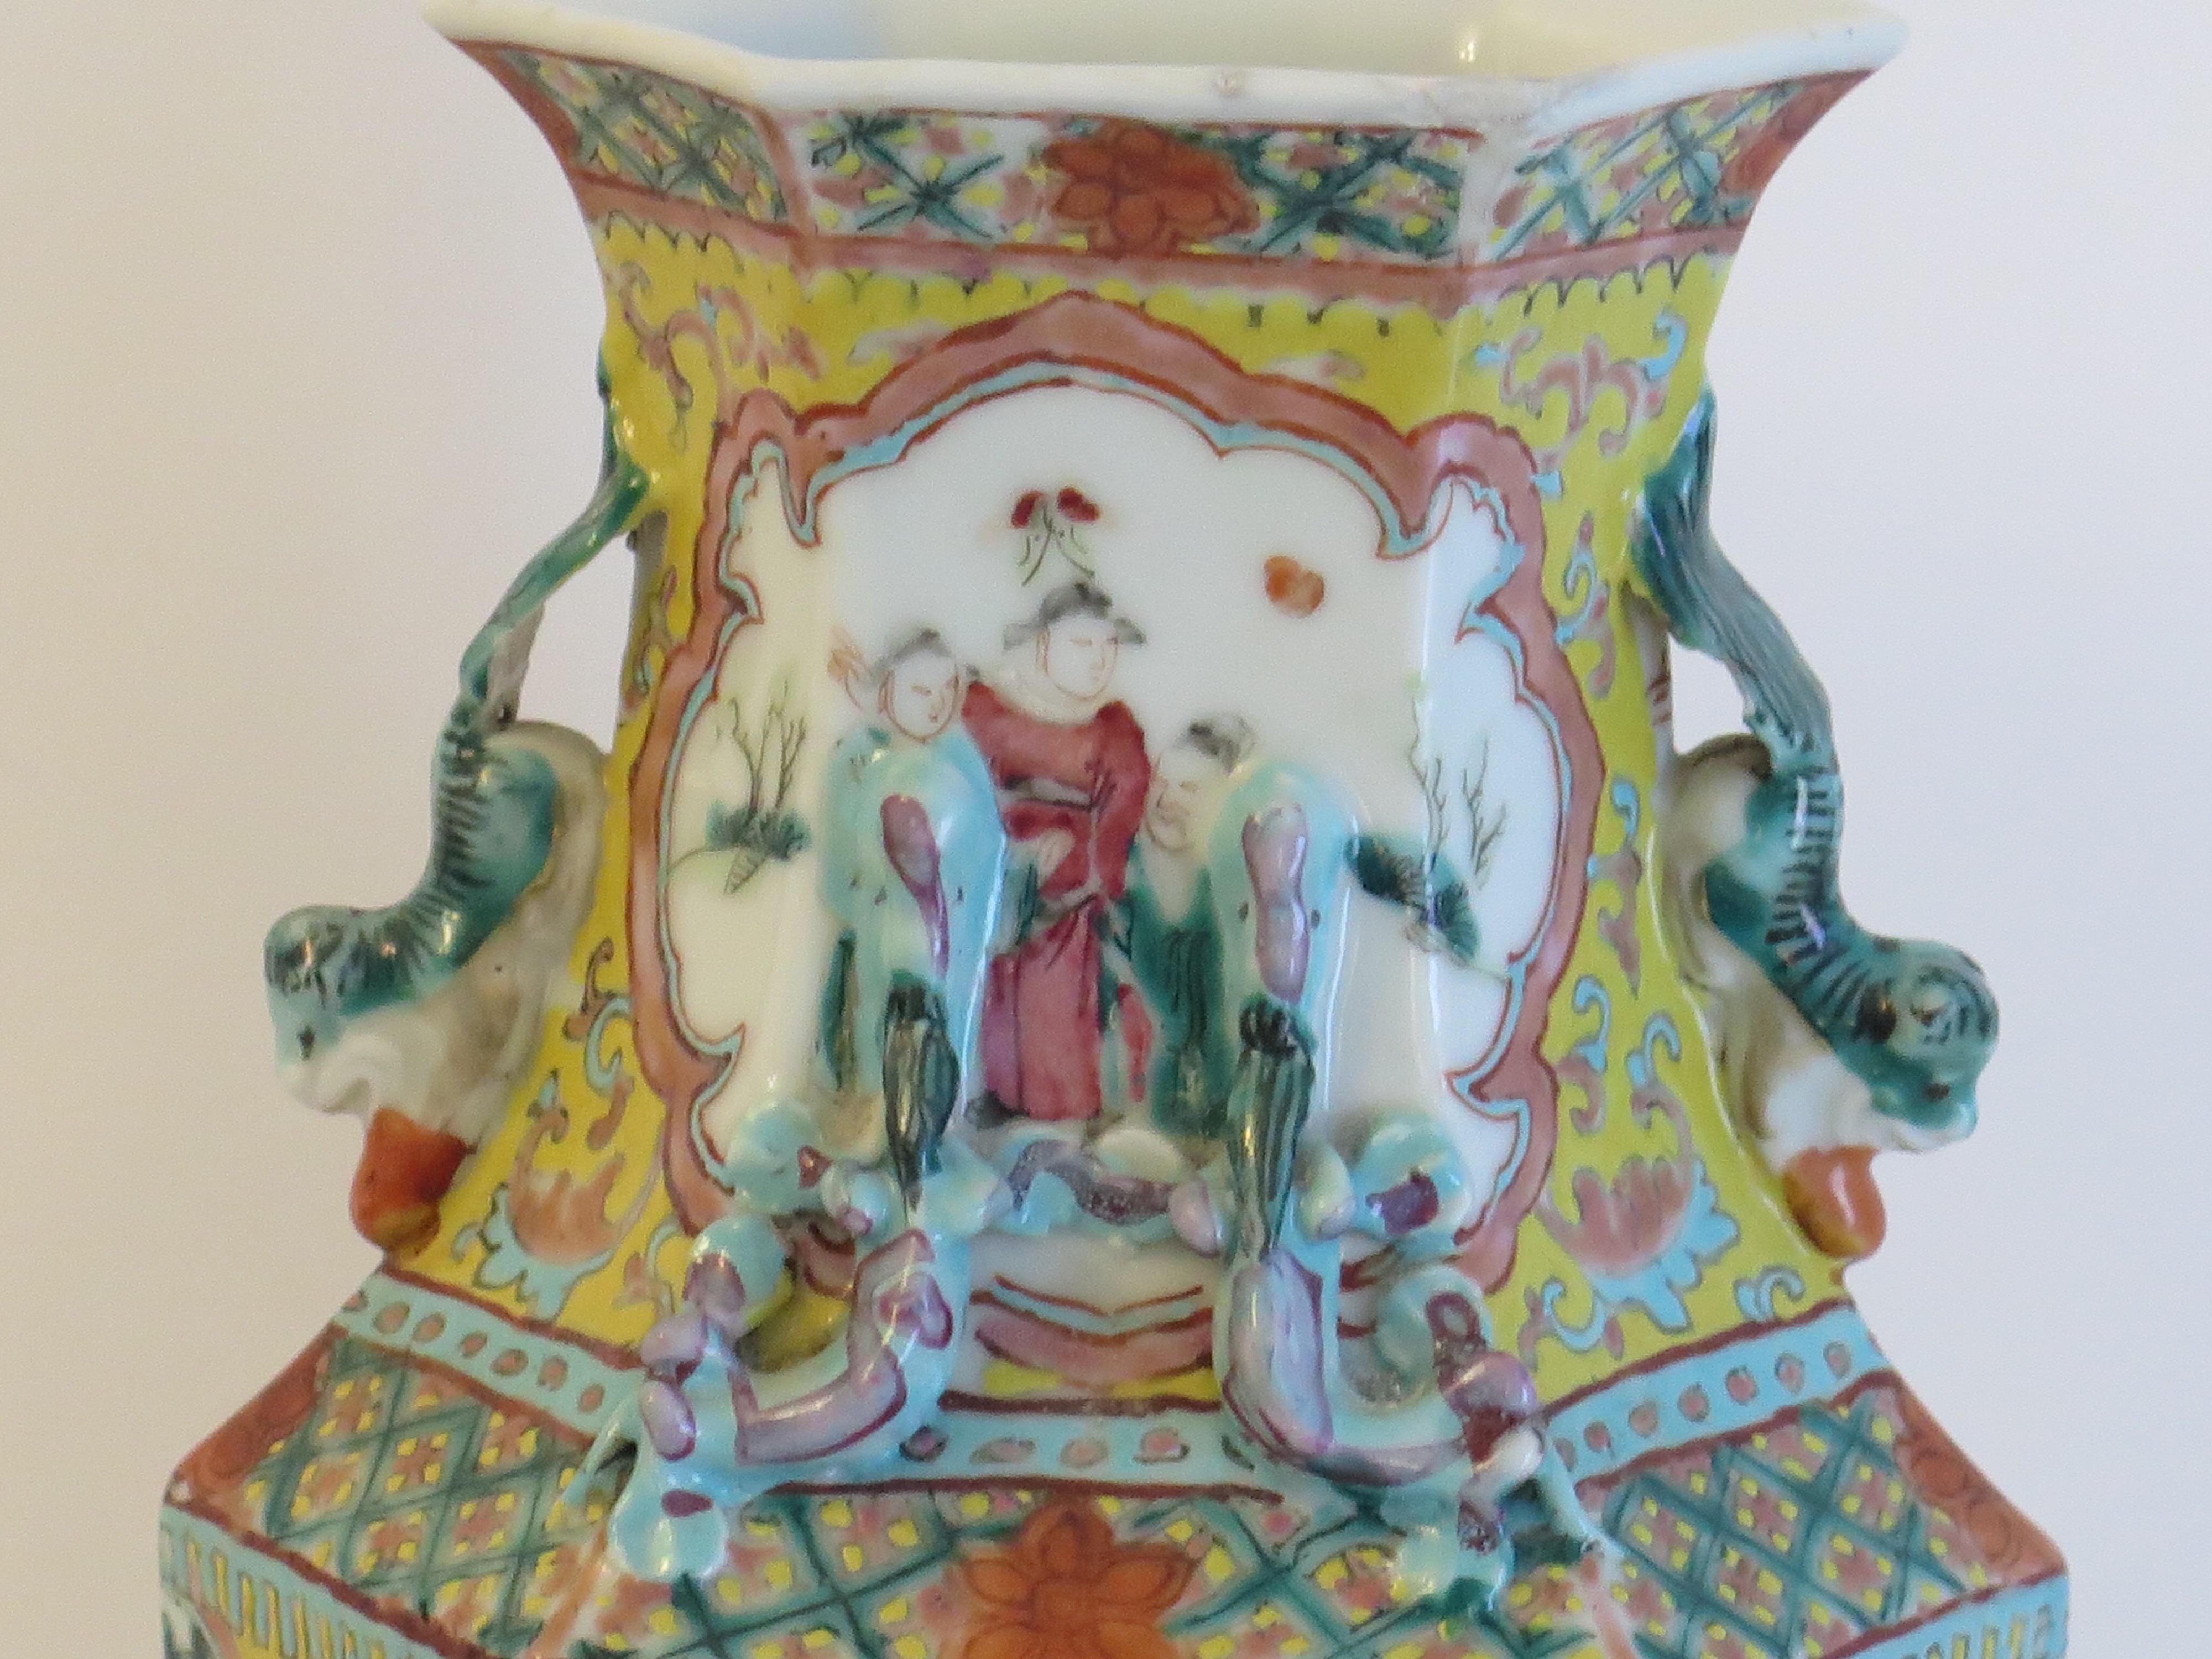 Chinese Export Vase Famille Rose Porcelain, Late Qing or Early Republic Period 5